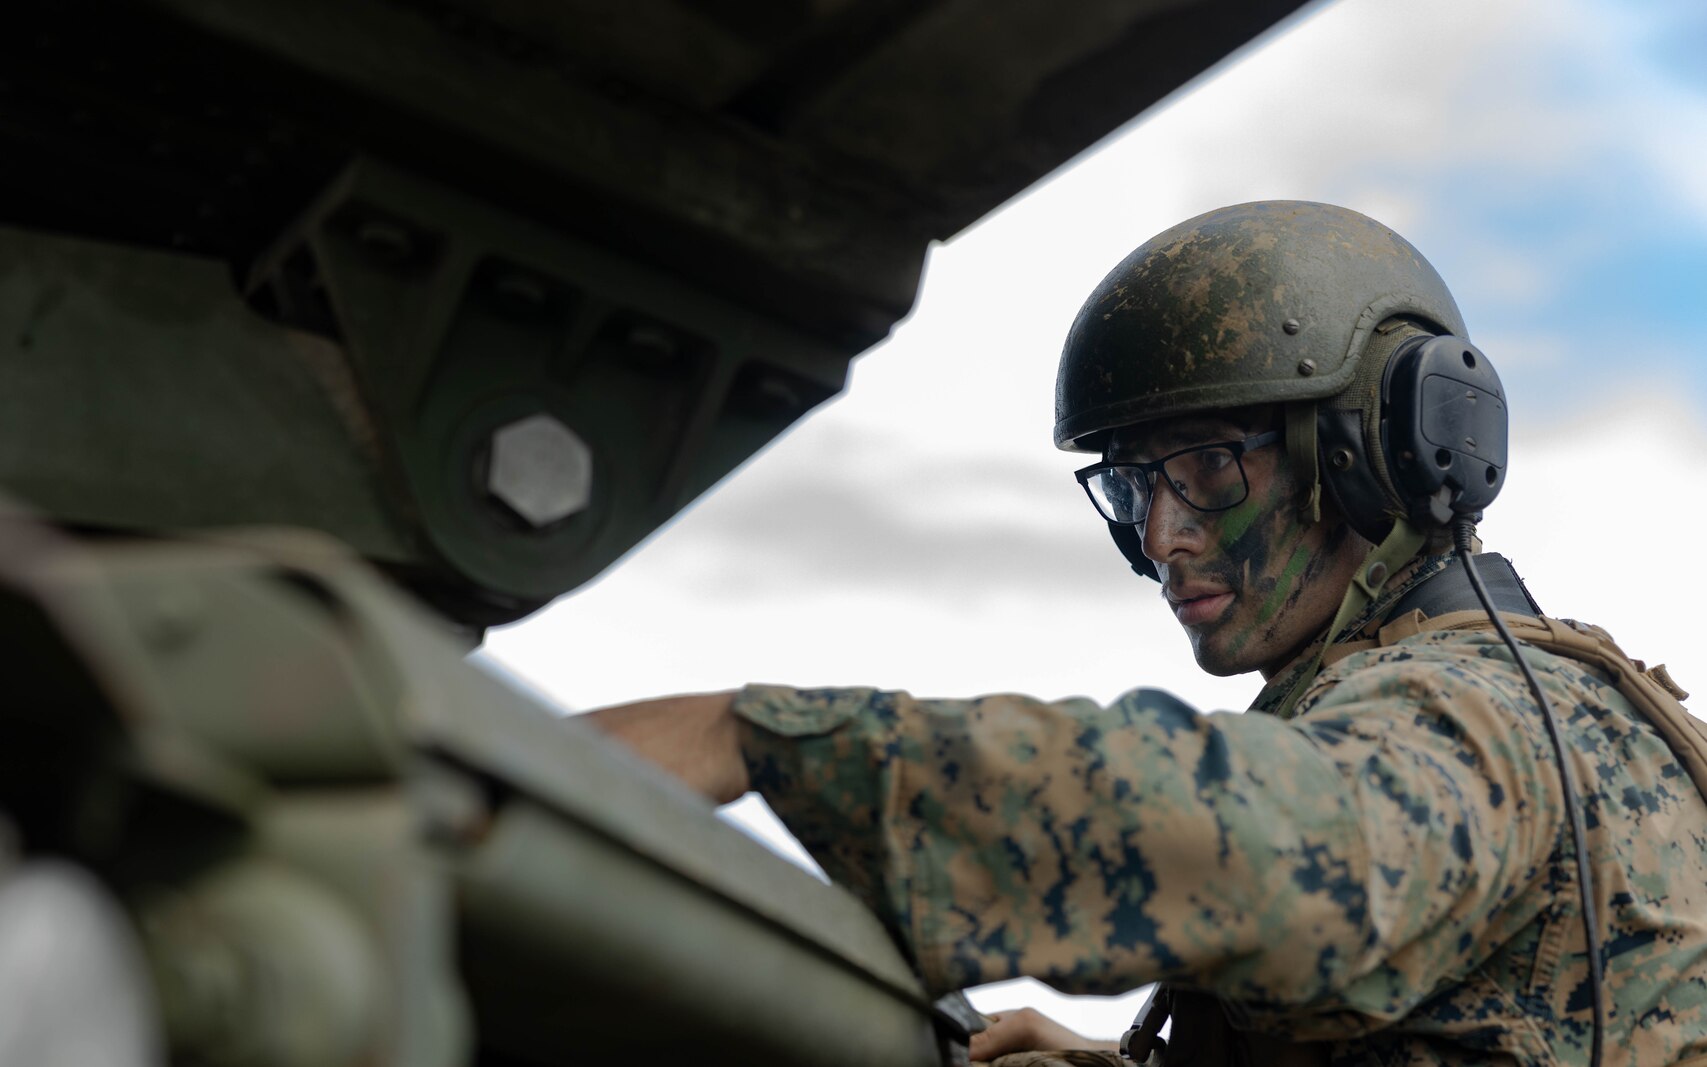 U.S. Marine Corps Cpl. Christian Hernandez conducts a maintenance inspection during a High Mobility Artillery Rocket System Rapid Infiltration demonstration on Iwo To, Japan, June 13, 2023. The exercise demonstrated the Marine Corps’ capability to rapidly emplace, fire, and displace in austere environments. Anderson, a native of Ivanhoe, California, is a High Mobility Artillery Rocket System operator with 5th Battalion, 11th Marines and is forward deployed in the Indo-Pacific under 3d Battalion, 12th Marines, 3d Marine Division as part of the Unit Deployment Program. (U.S. Marine Corps photo by Lance Cpl. Lucas Lu)